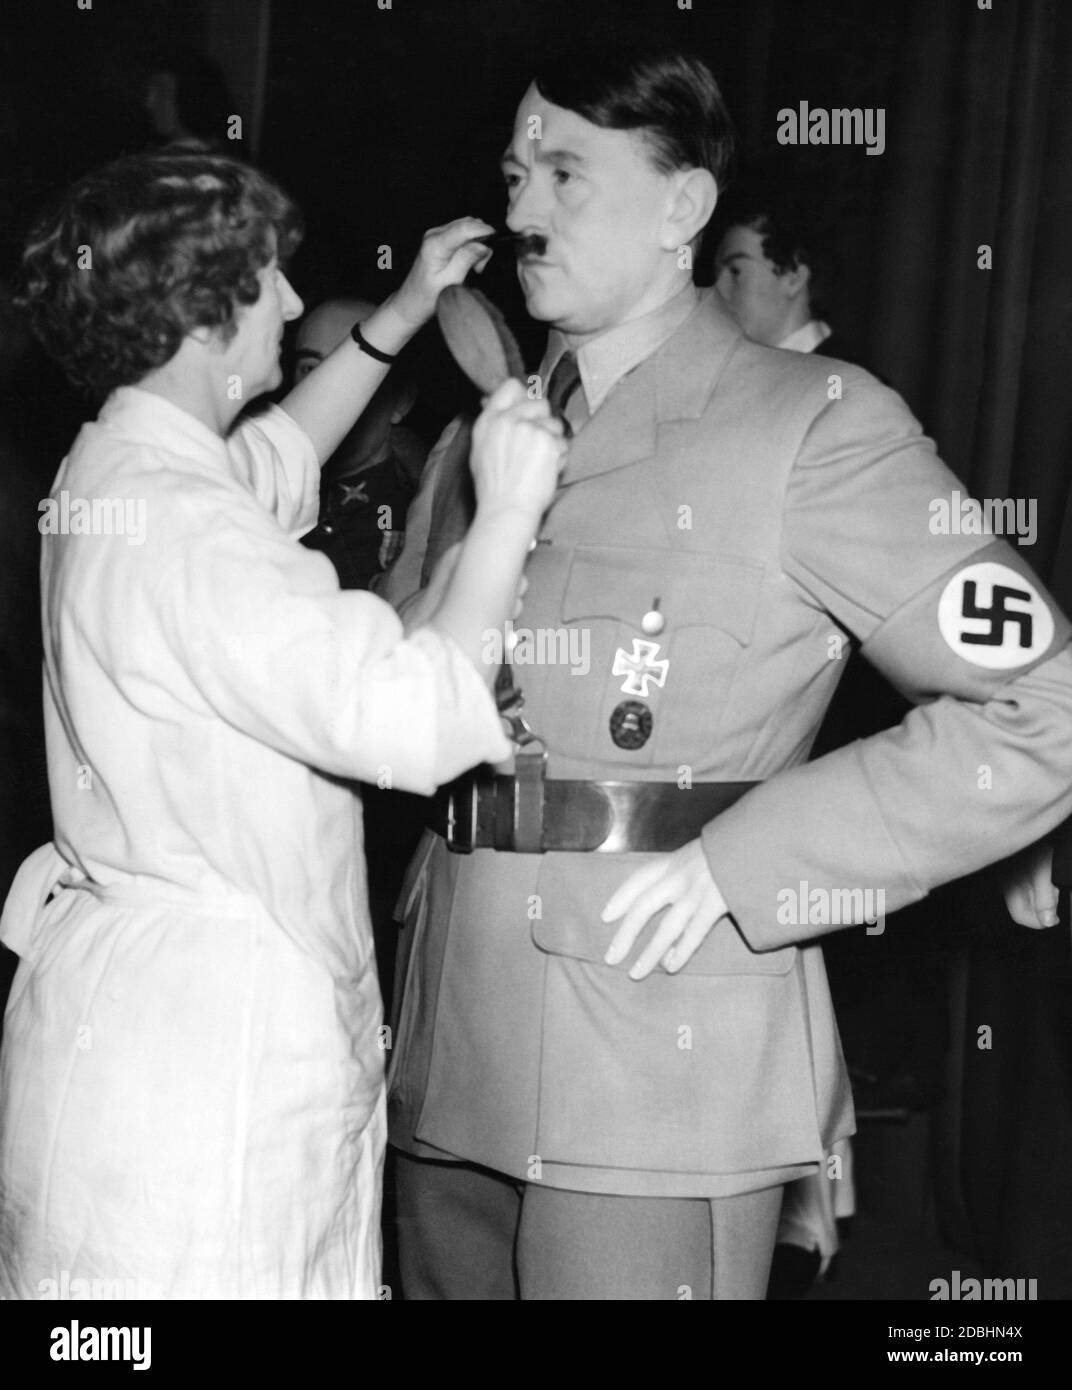 The moustache of an Adolf Hitler wax figure is being combed. Maud Collins acts as a hairdresser for the wax figures in Madame Tussauds Cabinet in London, including a figure of Adolf Hitler in party uniform. In the picture Collins is styling Hitler's moustache. Stock Photo